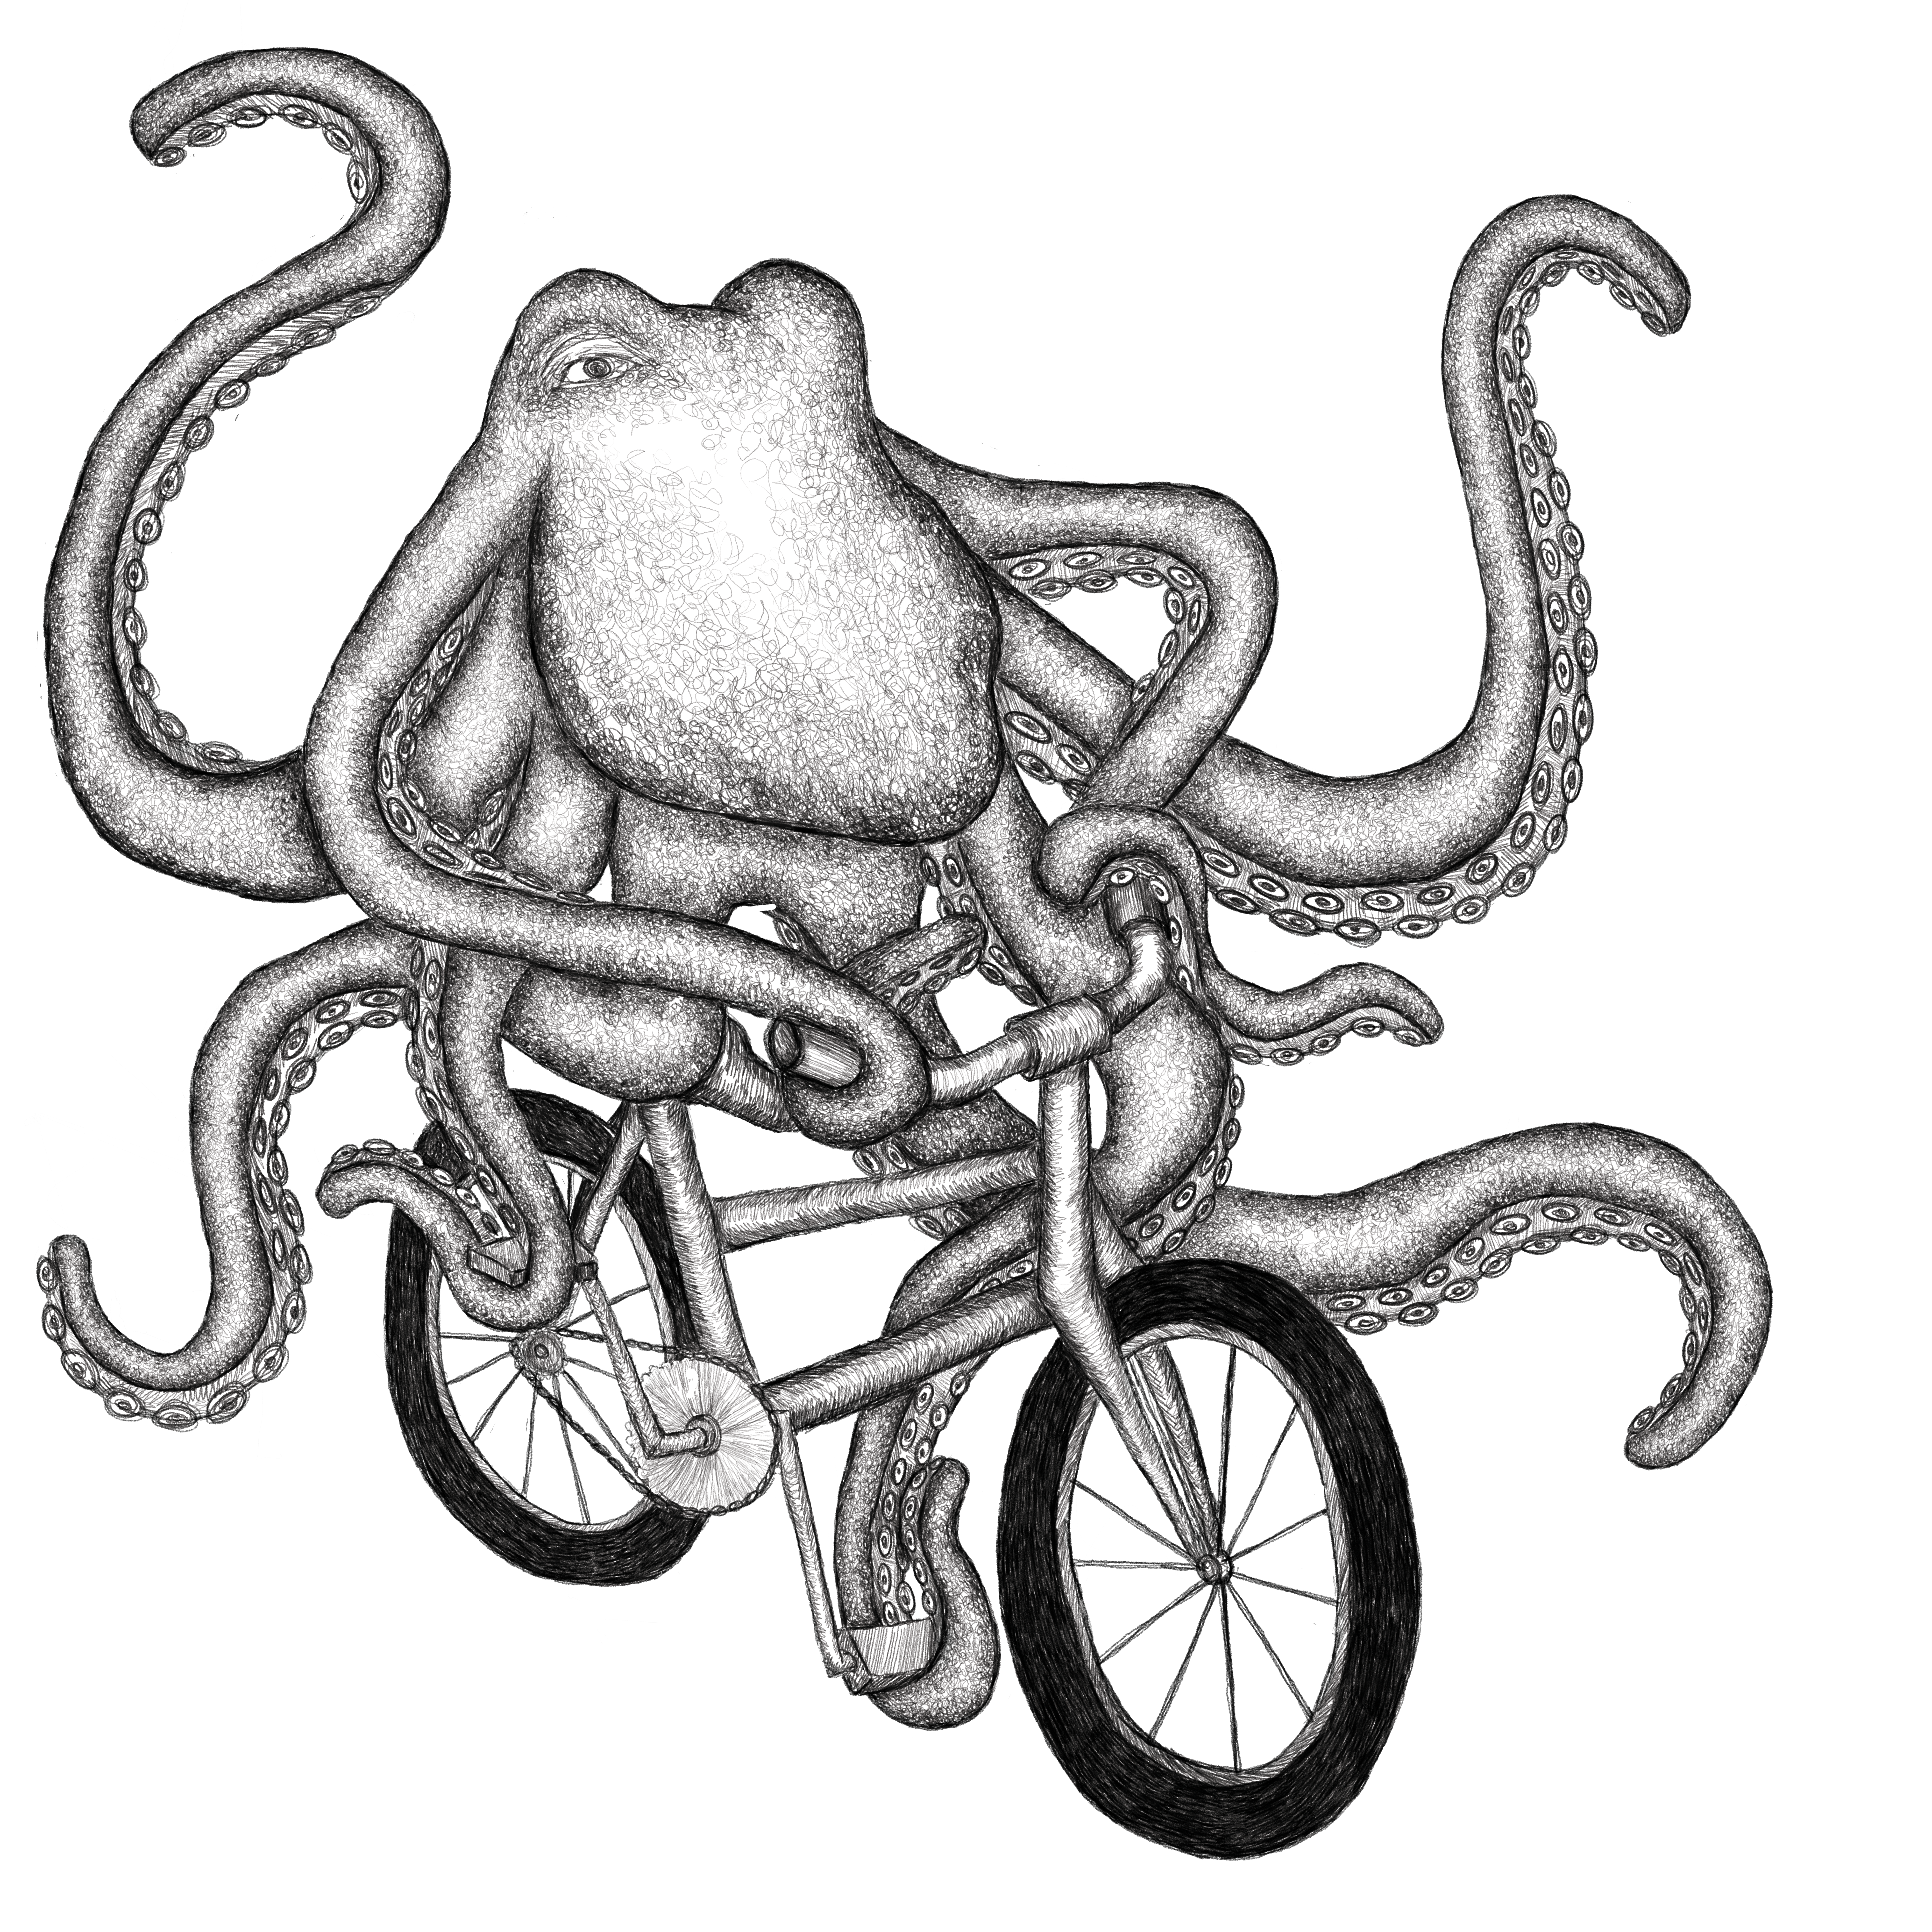 Octopus riding a bicycle